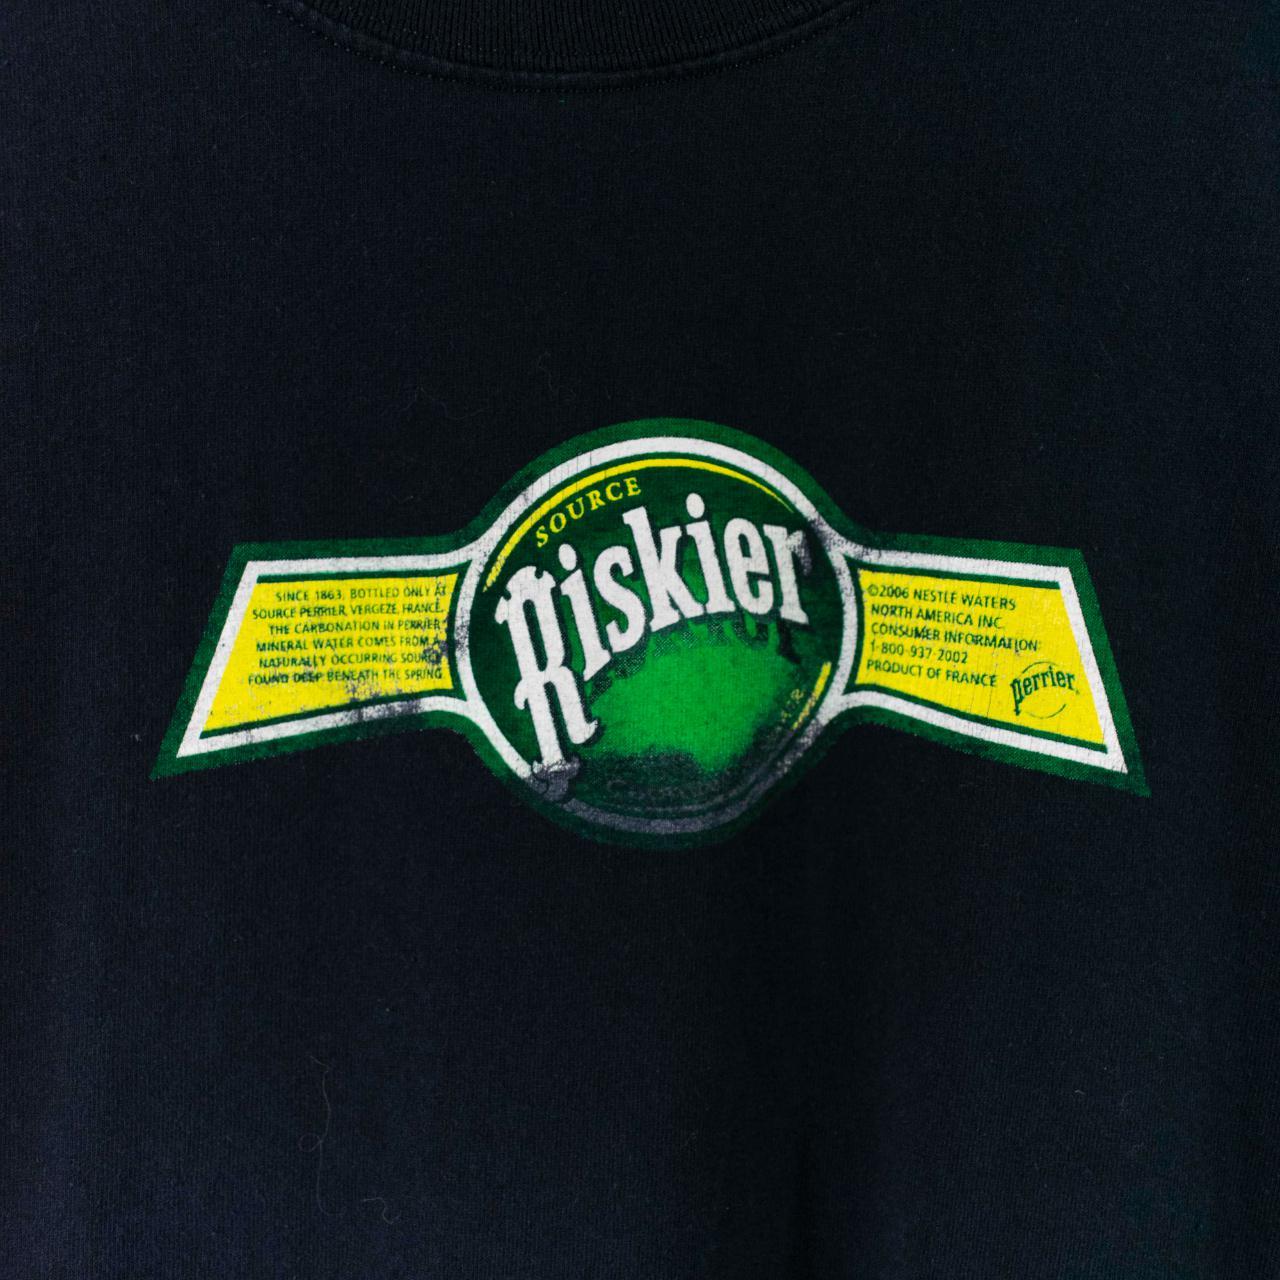 Product Image 2 - 2006 Perrier Source Riskier Promo